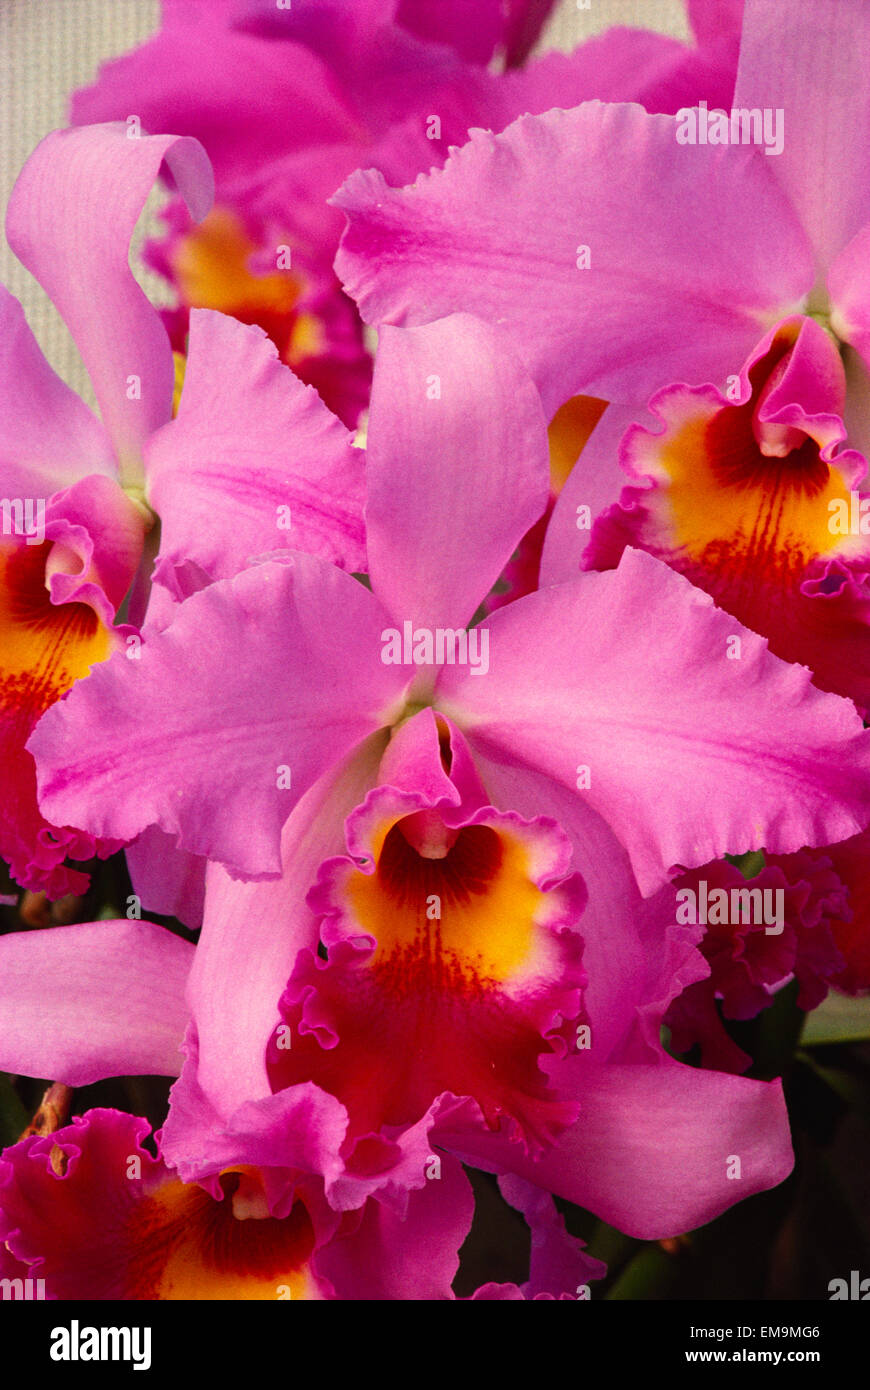 Hawaii, Cluster Of Pink Cattleya Orchids. Stock Photo